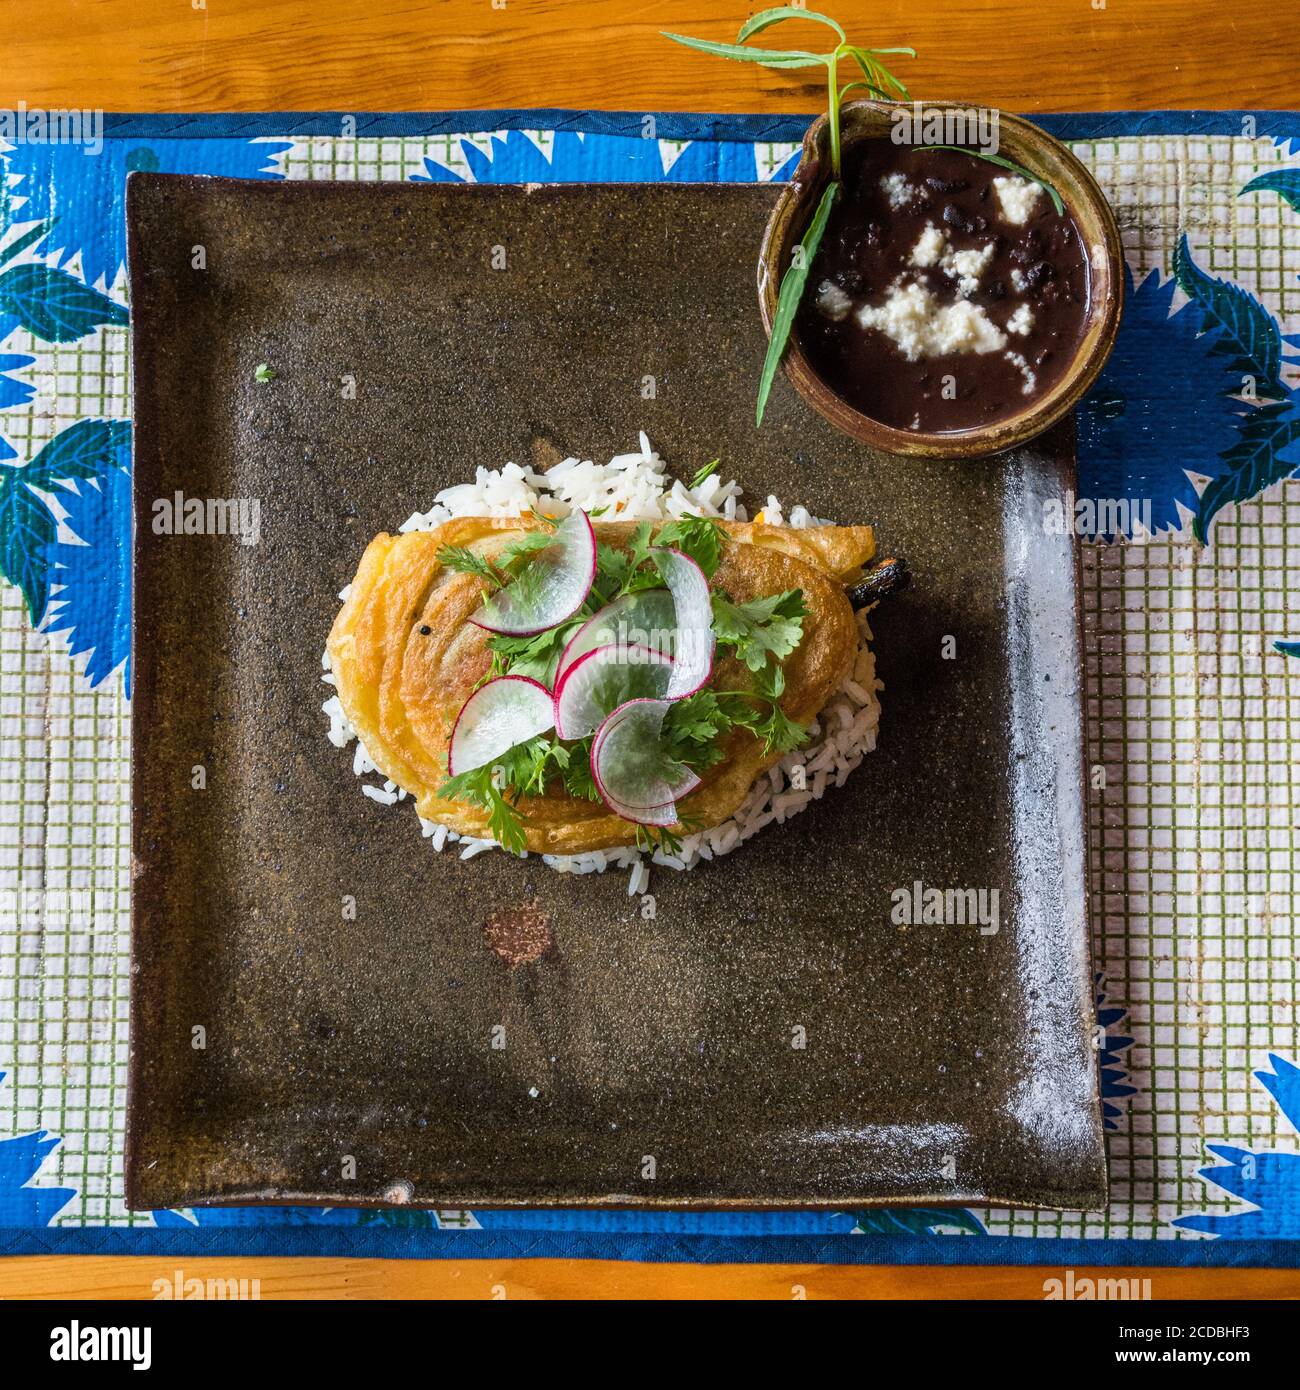 Chili relleno aux haricots noirs avec fromage Oaxacan. Banque D'Images